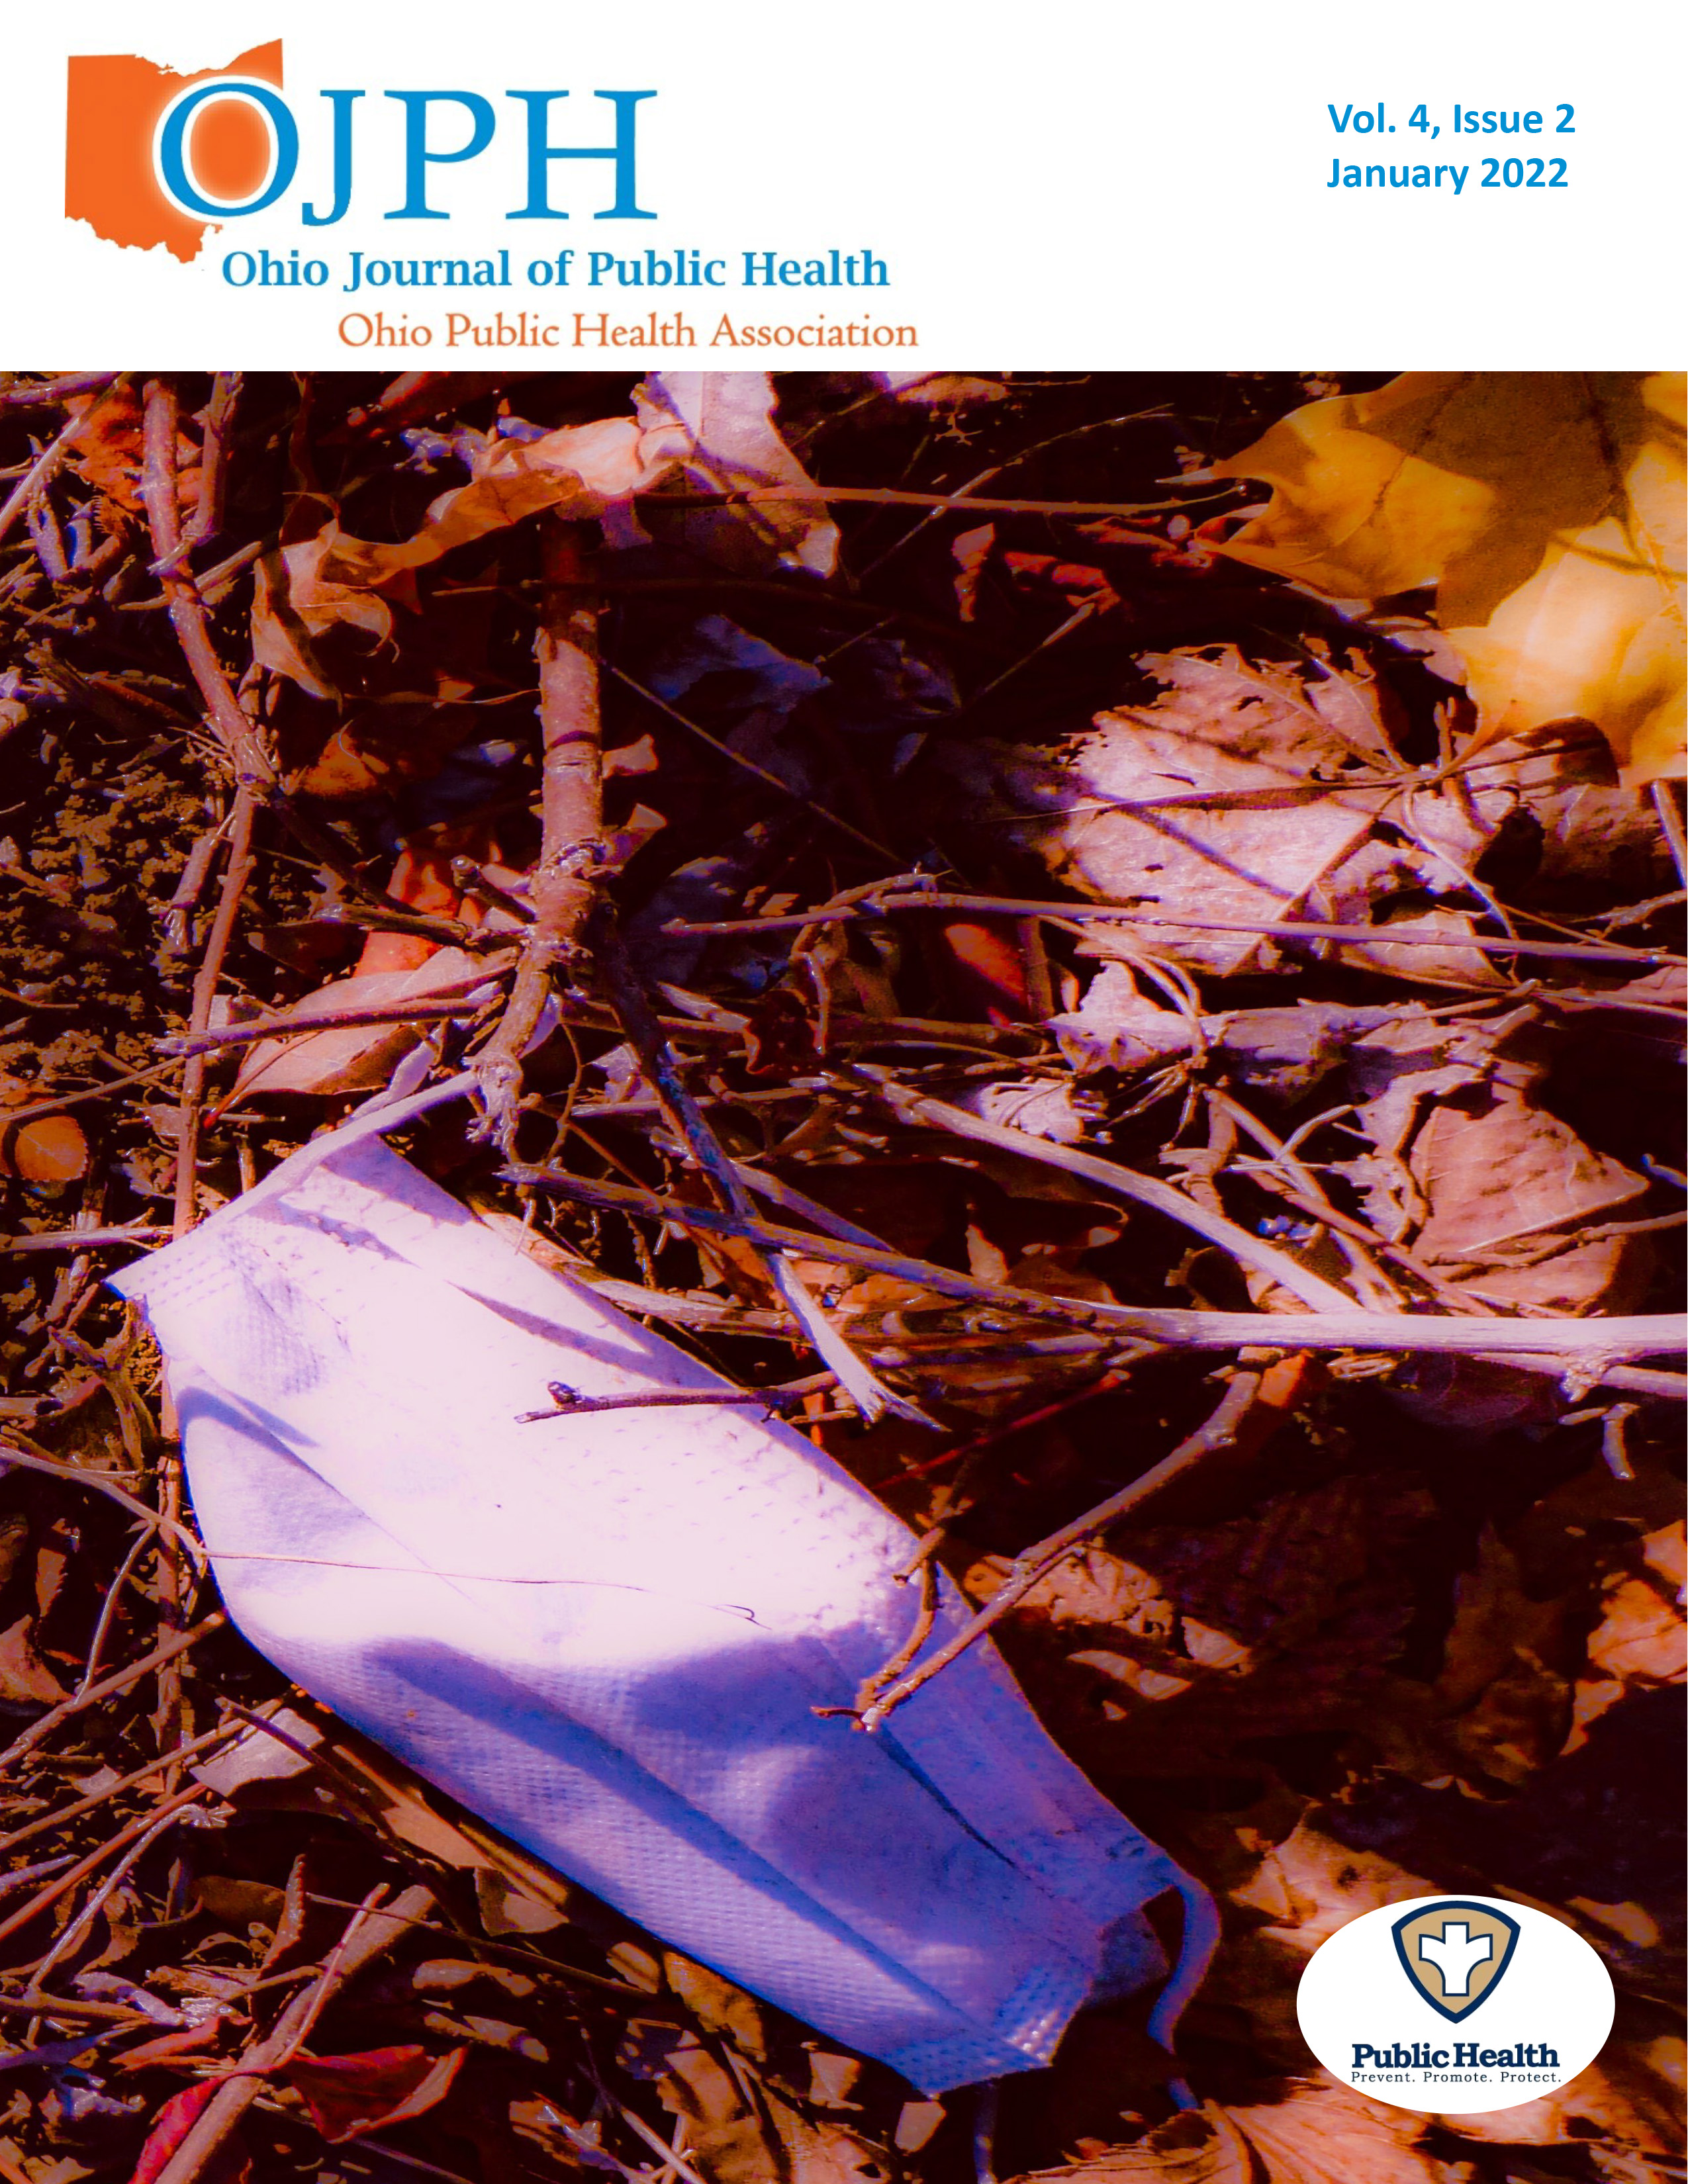 Ohio Journal of Public Health Vol. 4, Issue 2 January 2022